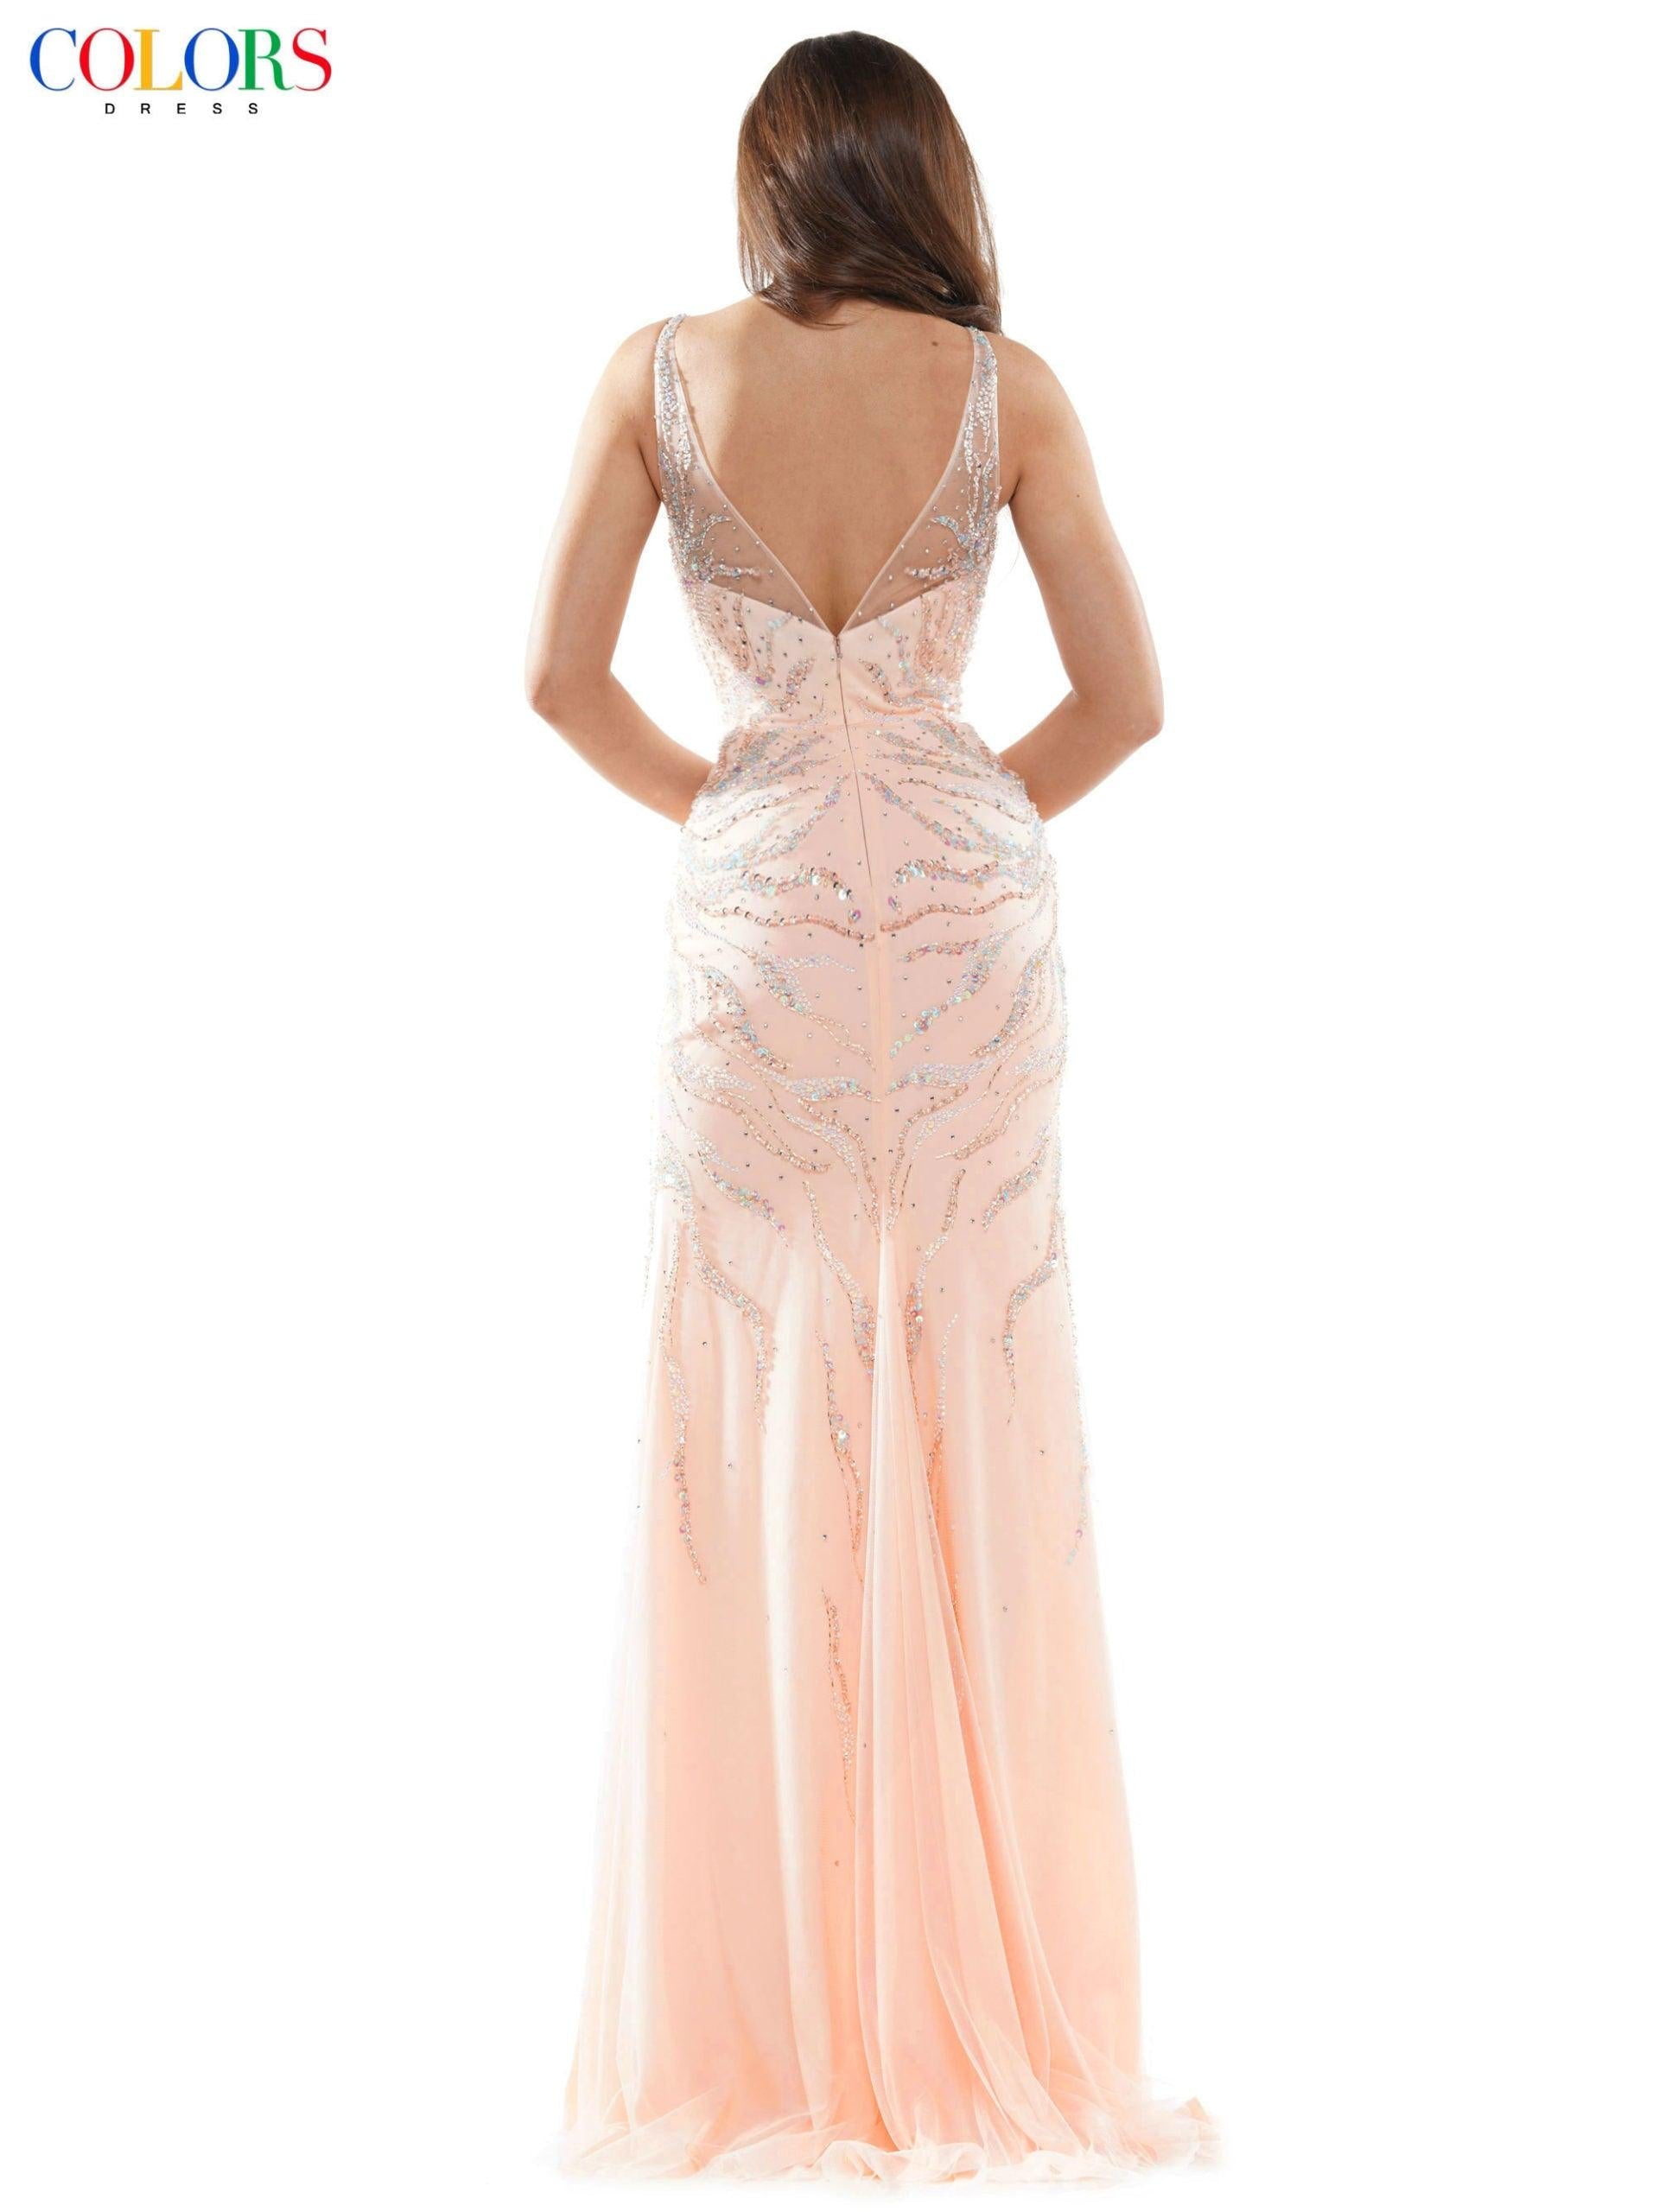 Colors Long Sleeveless Fitted Prom Dress 2651 - The Dress Outlet